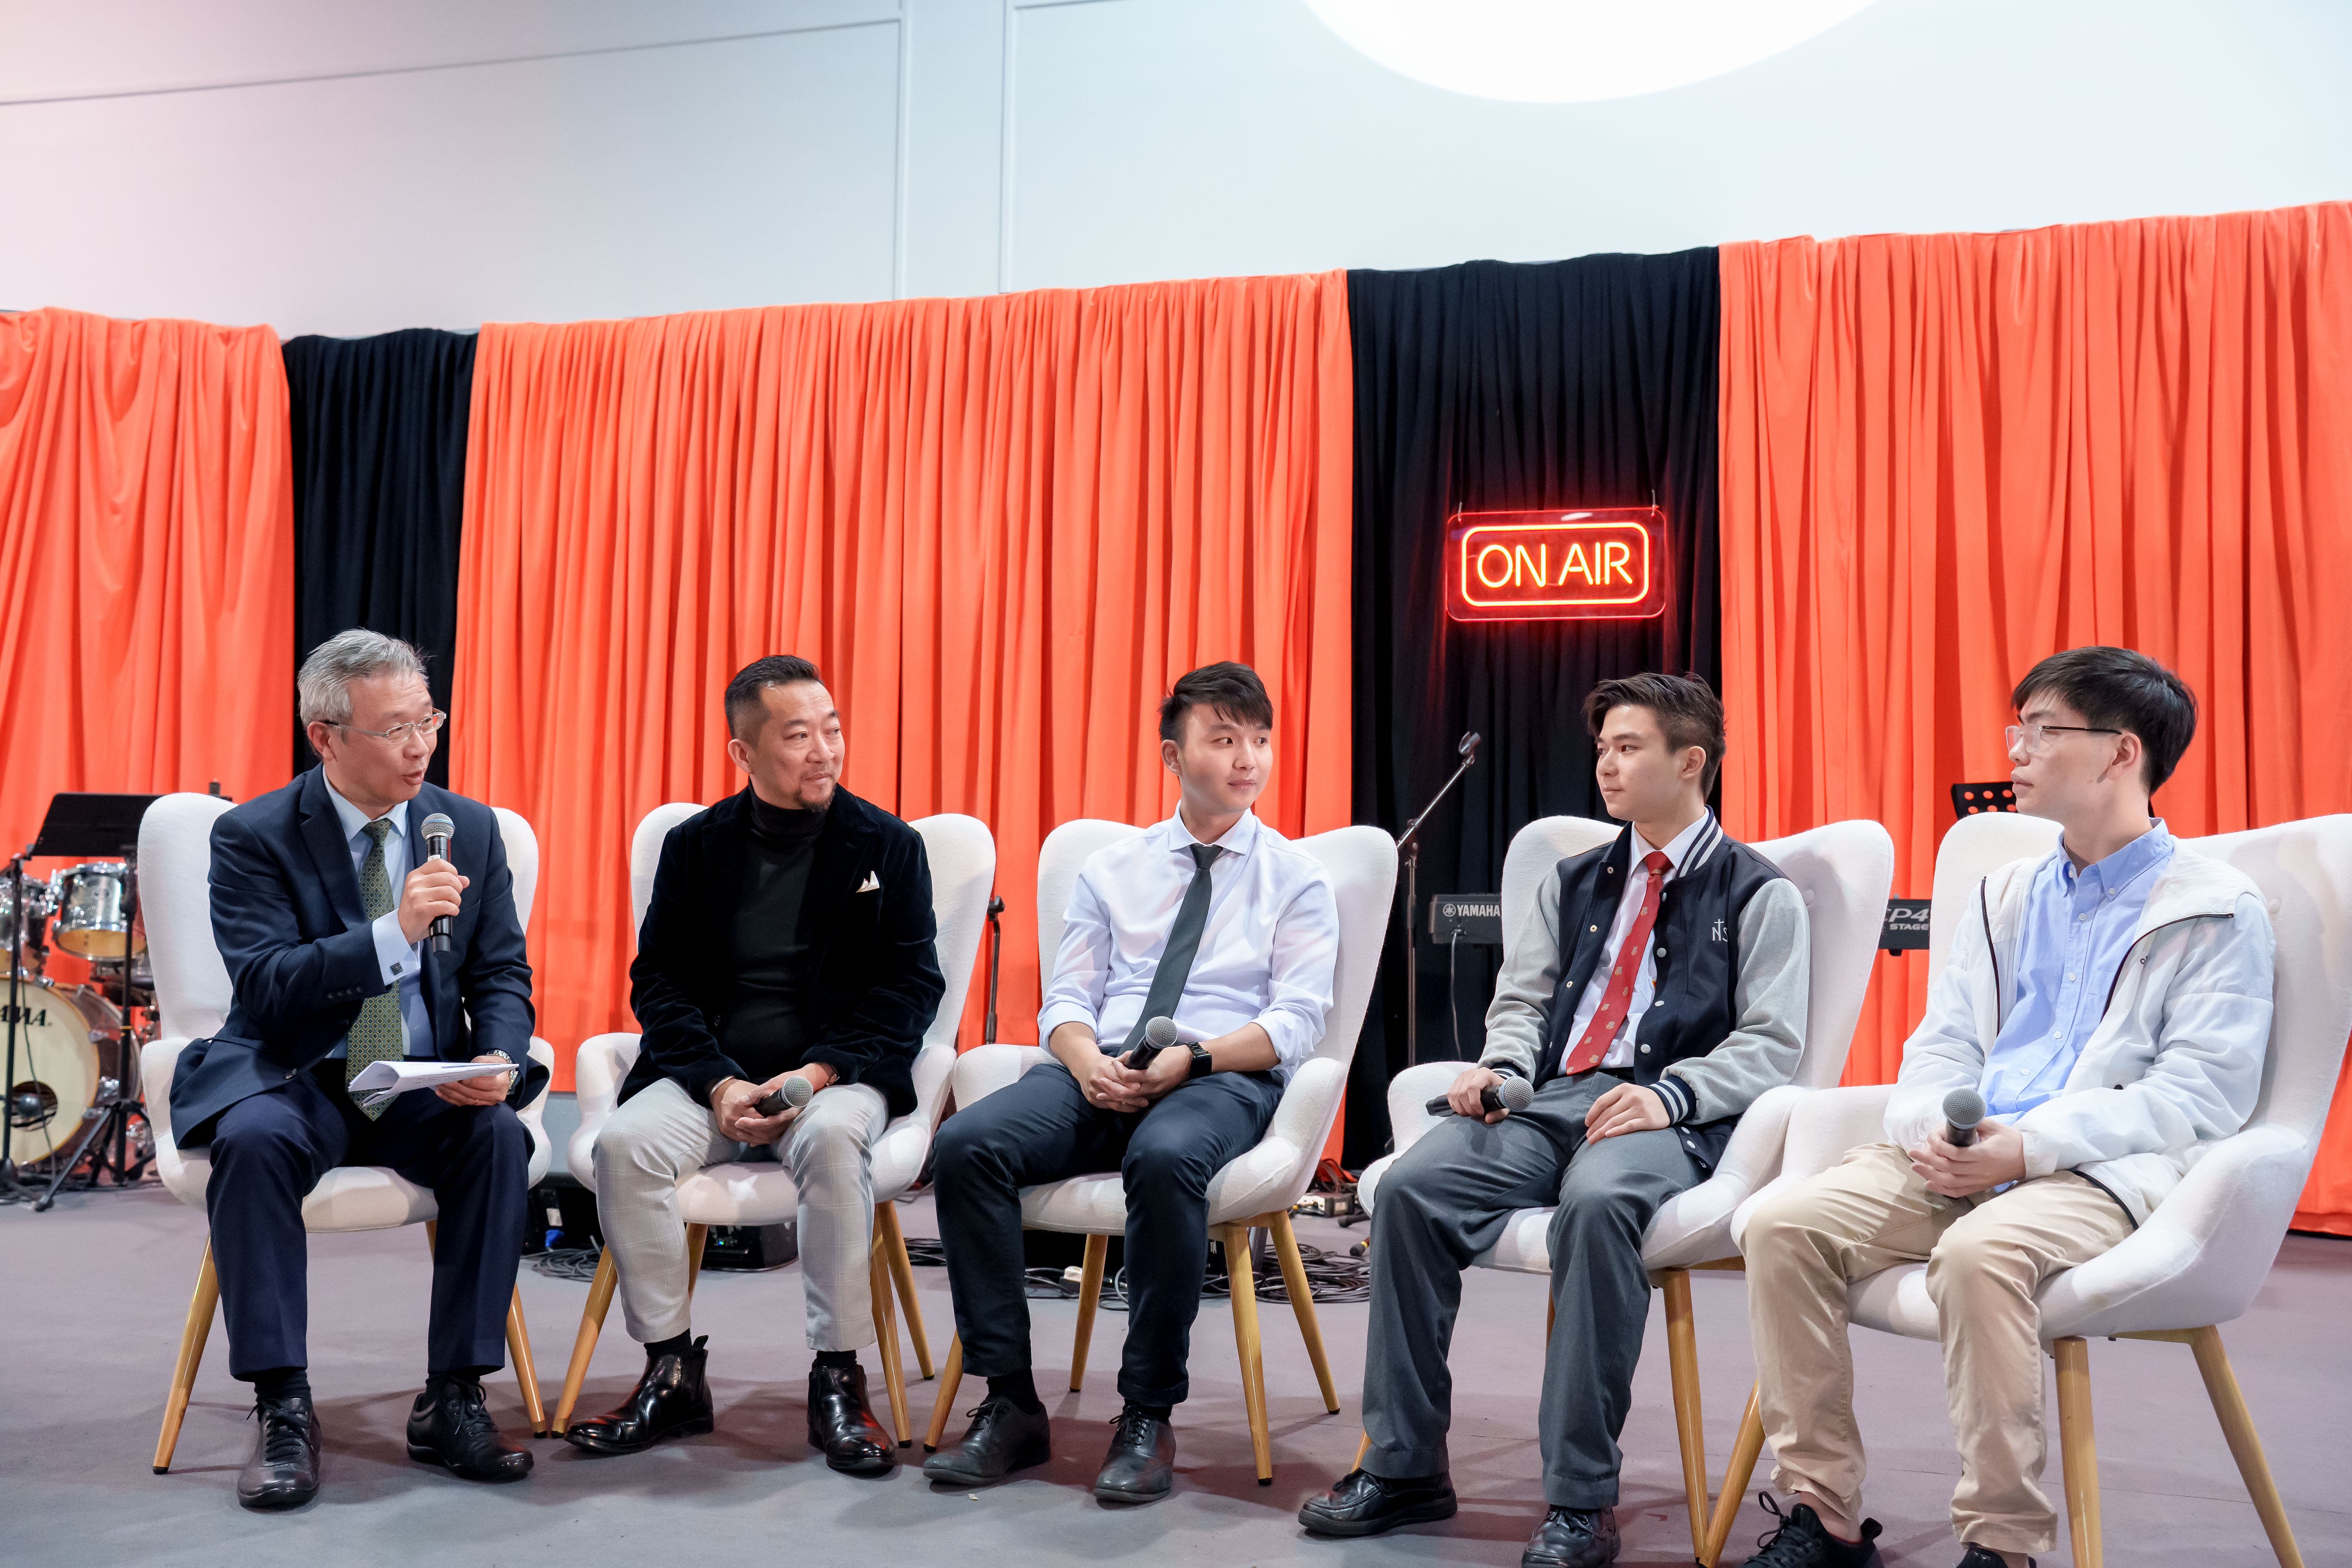 (Left) Prof. Ronald Chung, Dean of the School of Continuing Education, Hong Kong Baptist University, moderates a panel featuring a secondary school principal, a teacher, and students who shared their experiences and takeaways from the CLAP-TECH programme. (From second left to right) Principal Li Kin Man of Salesians of Don Bosco Ng Siu Mui Secondary School, said, “Integrating VPET into mainstream secondary school education helps us to nurture students’, ultimately empowering them to shine.” Mr. Poon from Hong Kong Red Swastika Society Tai Po Secondary School marked, “It is natural for secondary students to be uncertain about their future given their young age. Therefore, they should broaden their horizons to identify their strengths and focus on developing them for future opportunities.” Matthew Chan, student from Salesians of Don Bosco Ng Siu Mui Secondary School, reflected, “The teachers at CLAP-TECH have wholeheartedly guided me to discover my talents and interests, aiding me in establishing a clear life goal and career path.” Scott Cheung, a Year 2 Student of Higher Diploma in Data Science, said, “CLAP-TECH provided me with an internship opportunity last summer, where I gained a wealth of knowledge beyond textbooks and realised that soft skills like communications are crucial in the IT field.”